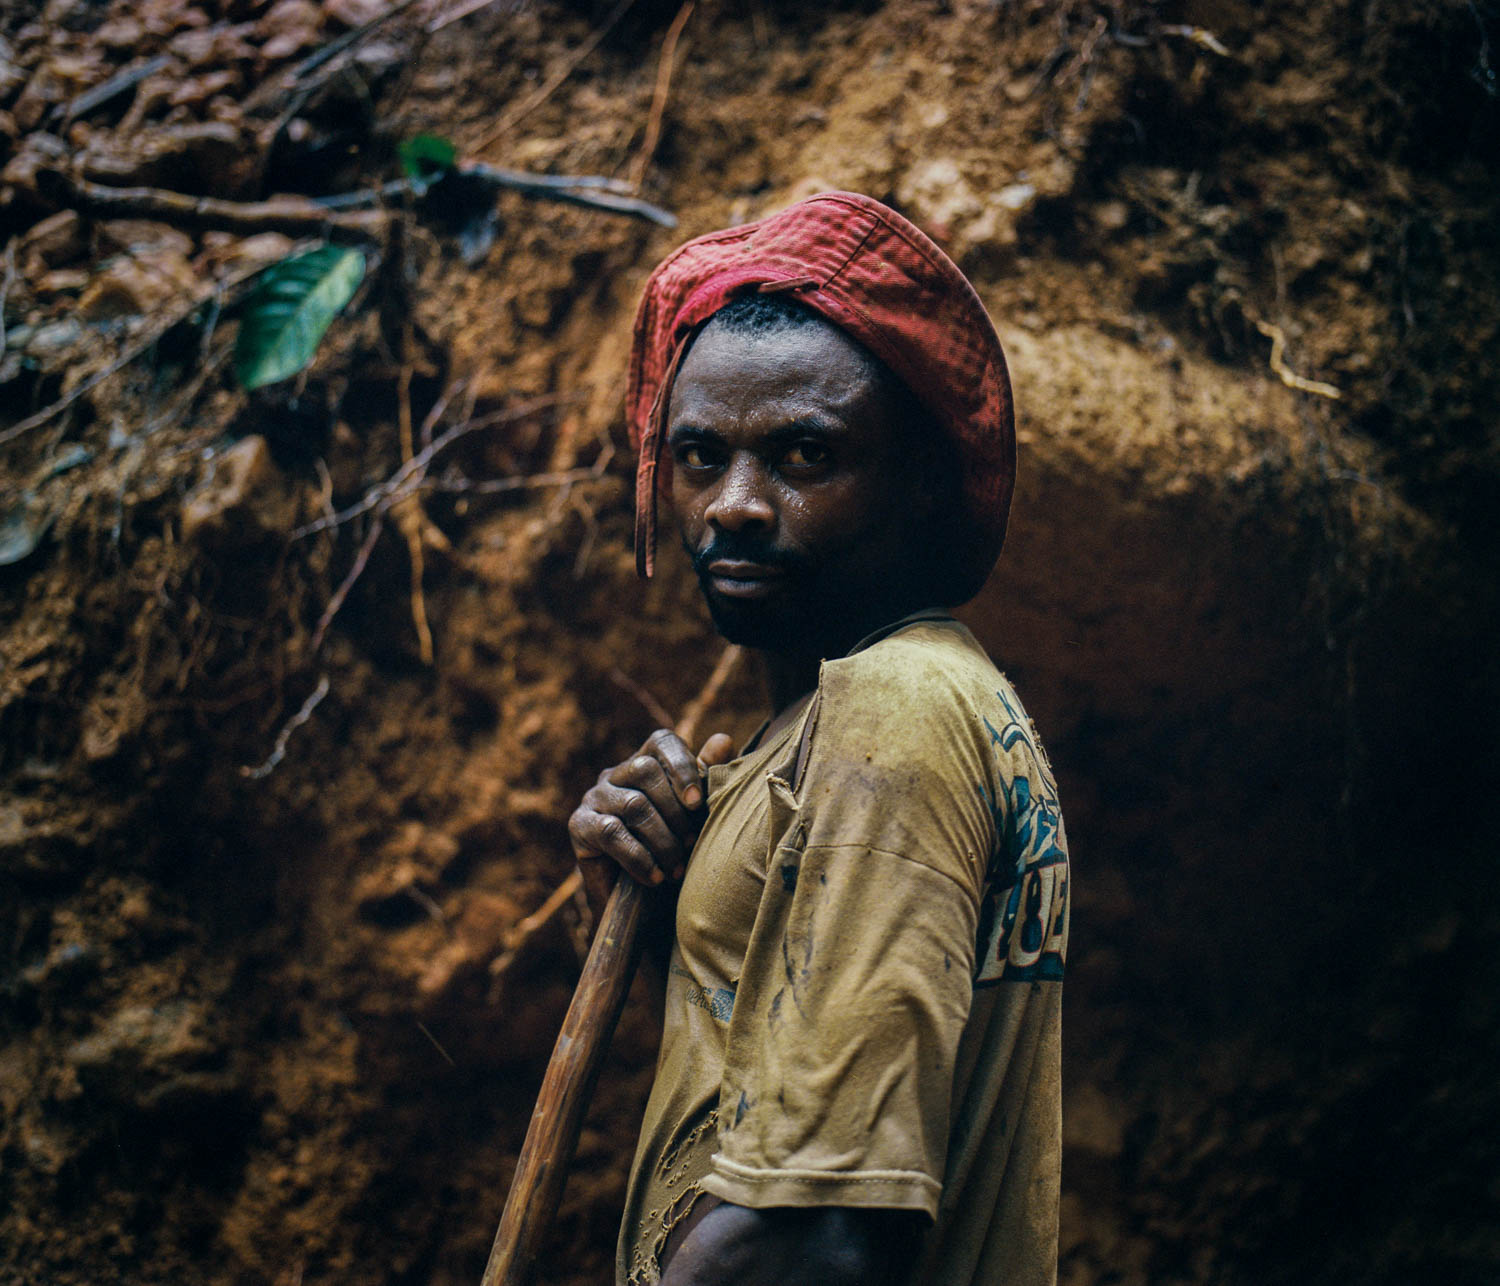  Migrants from the Bashi tribe of Bukavu region provide labor for the mines in territory controlled by the Raia Mutomboki. The Rega tribe, which make up the RM, are able to play supervisory roles due to their unique technical knowledge on the mining 